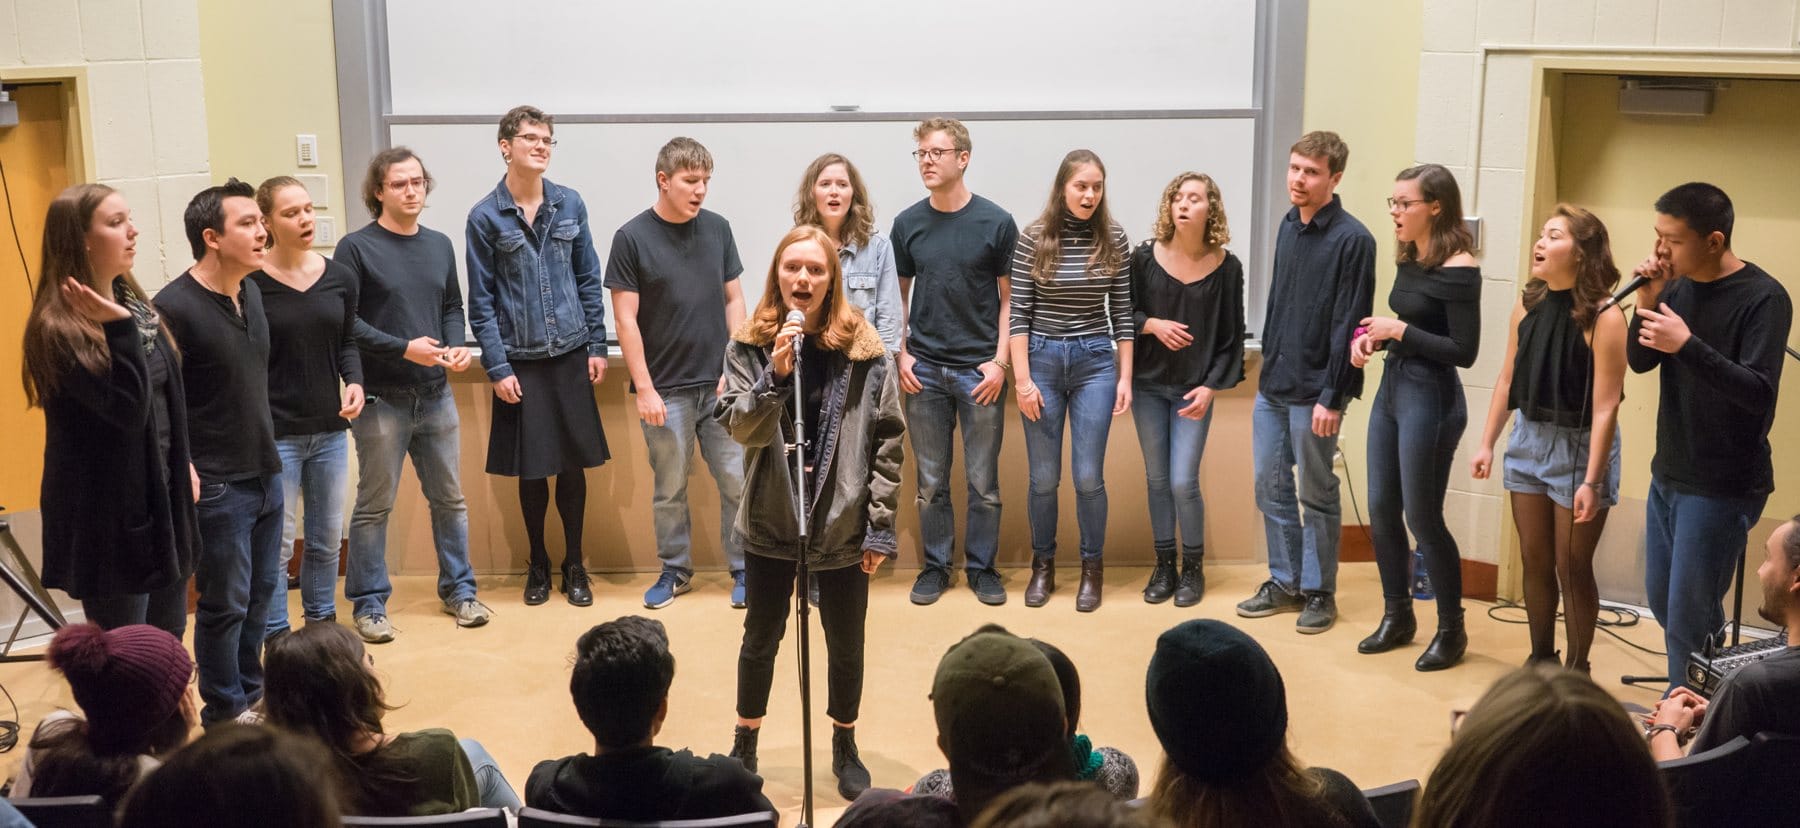 An acapella group performs with a woman singing solo in front. 